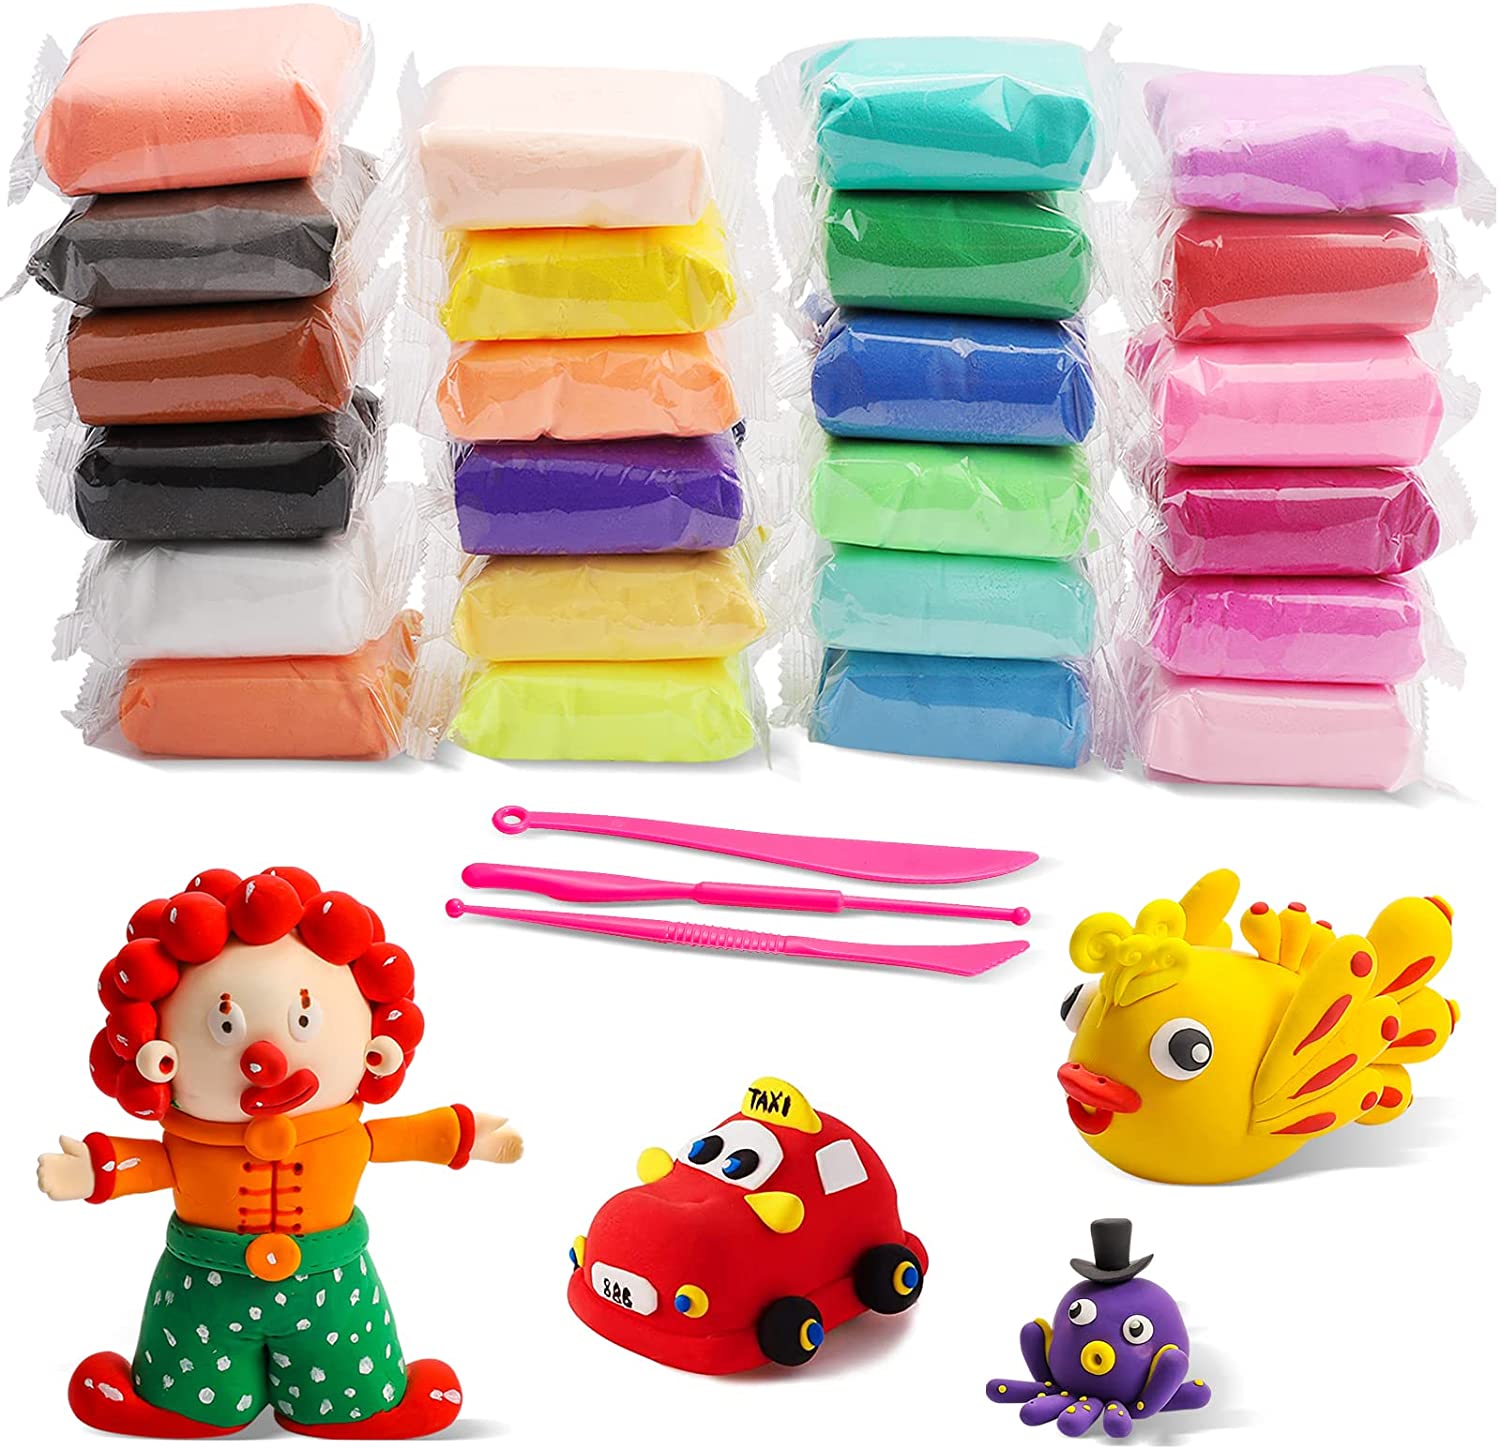 Air Dry Clay for Kids, 50 Colors Air Dry Ultra Light Clay, Modeling Clay for Kids with Play Mat & 3 Sculpting Tools, Clay Non Toxic, Soft & Safe 